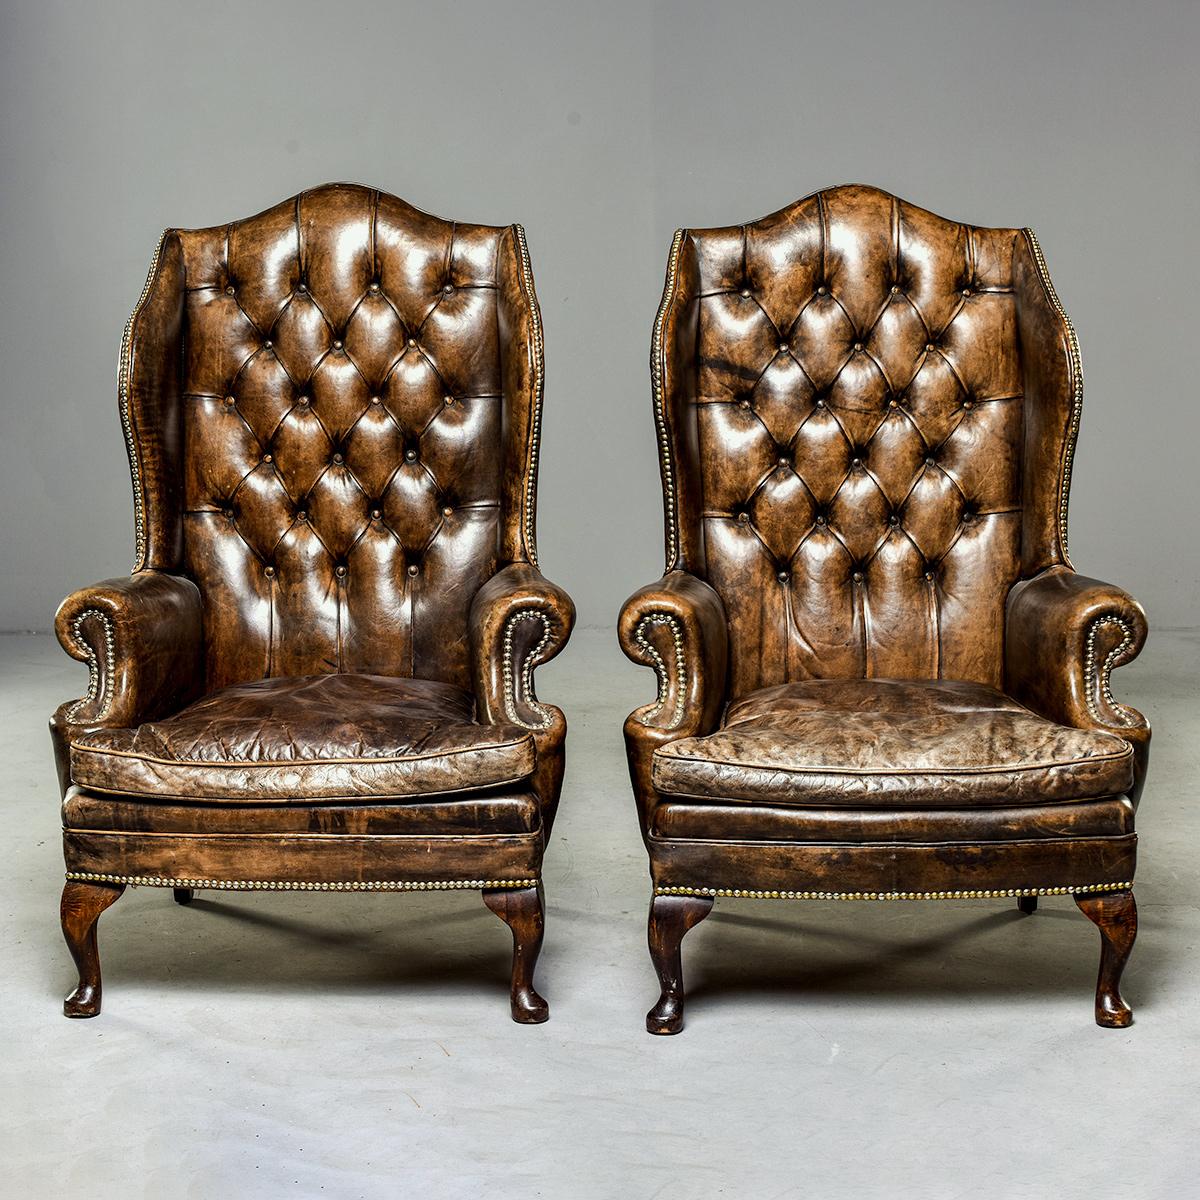 English pair of leather armchairs with tall, tufted and winged seat backs, rolled arms, cabriole legs, brass nailhead tacks and removable seat cushions, circa 1920s. Original leather in very good condition with nice patina, frames and structure are